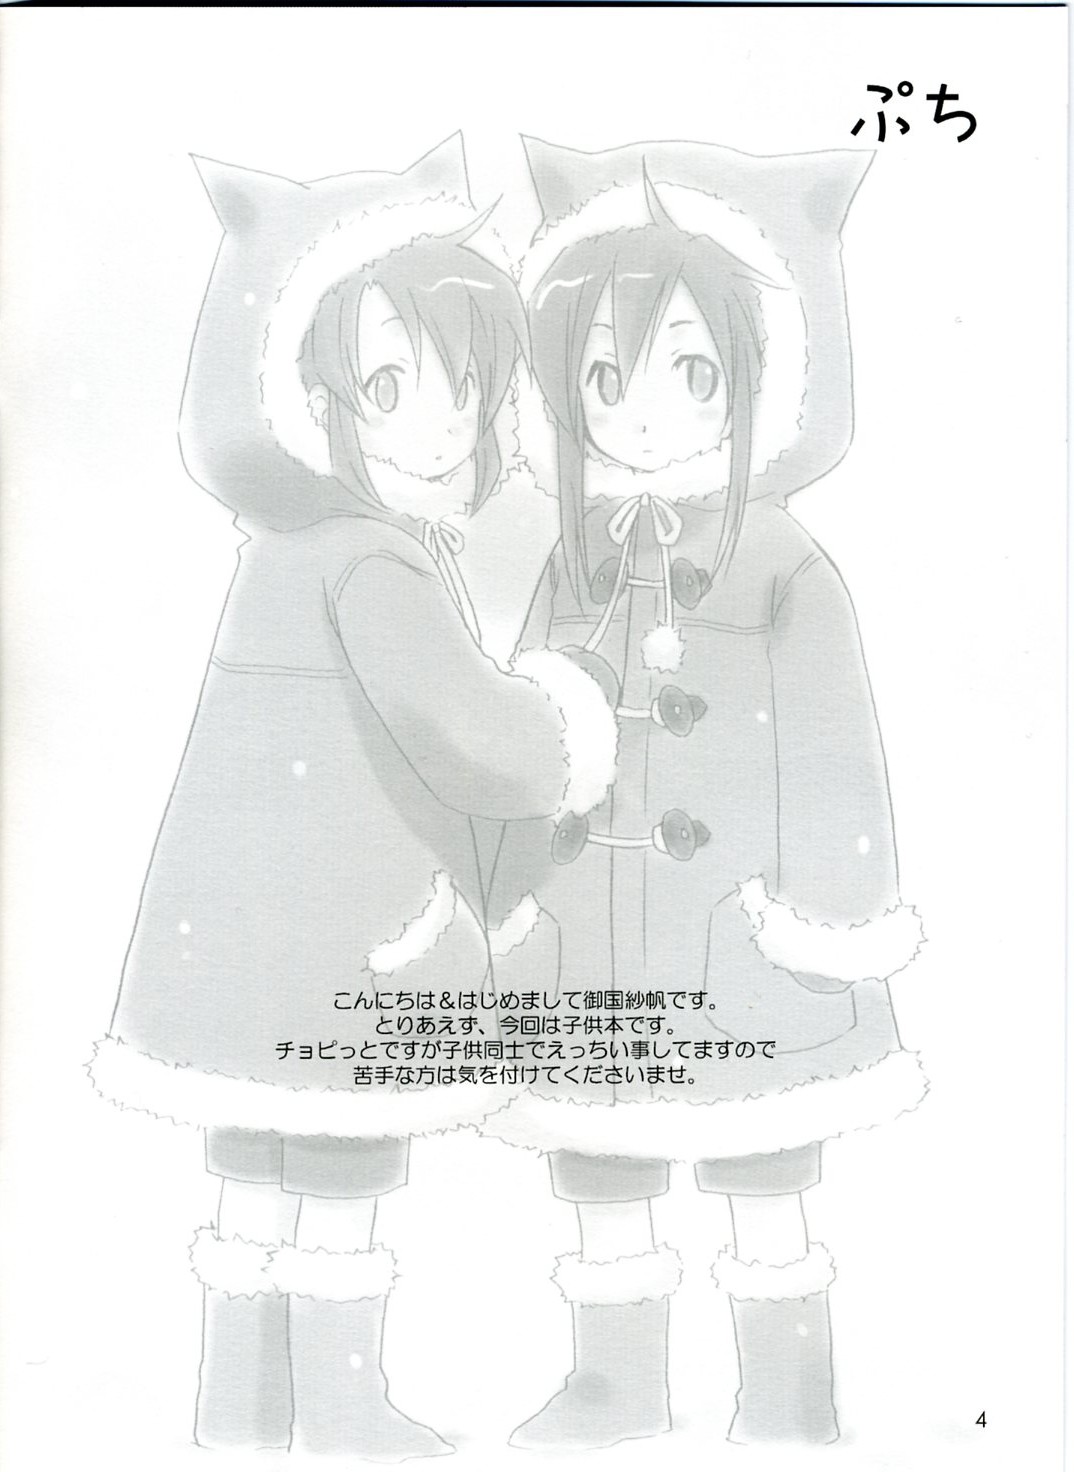 [Pink Power (Mikuni Saho)] Petit (Tales of the Abyss) page 3 full